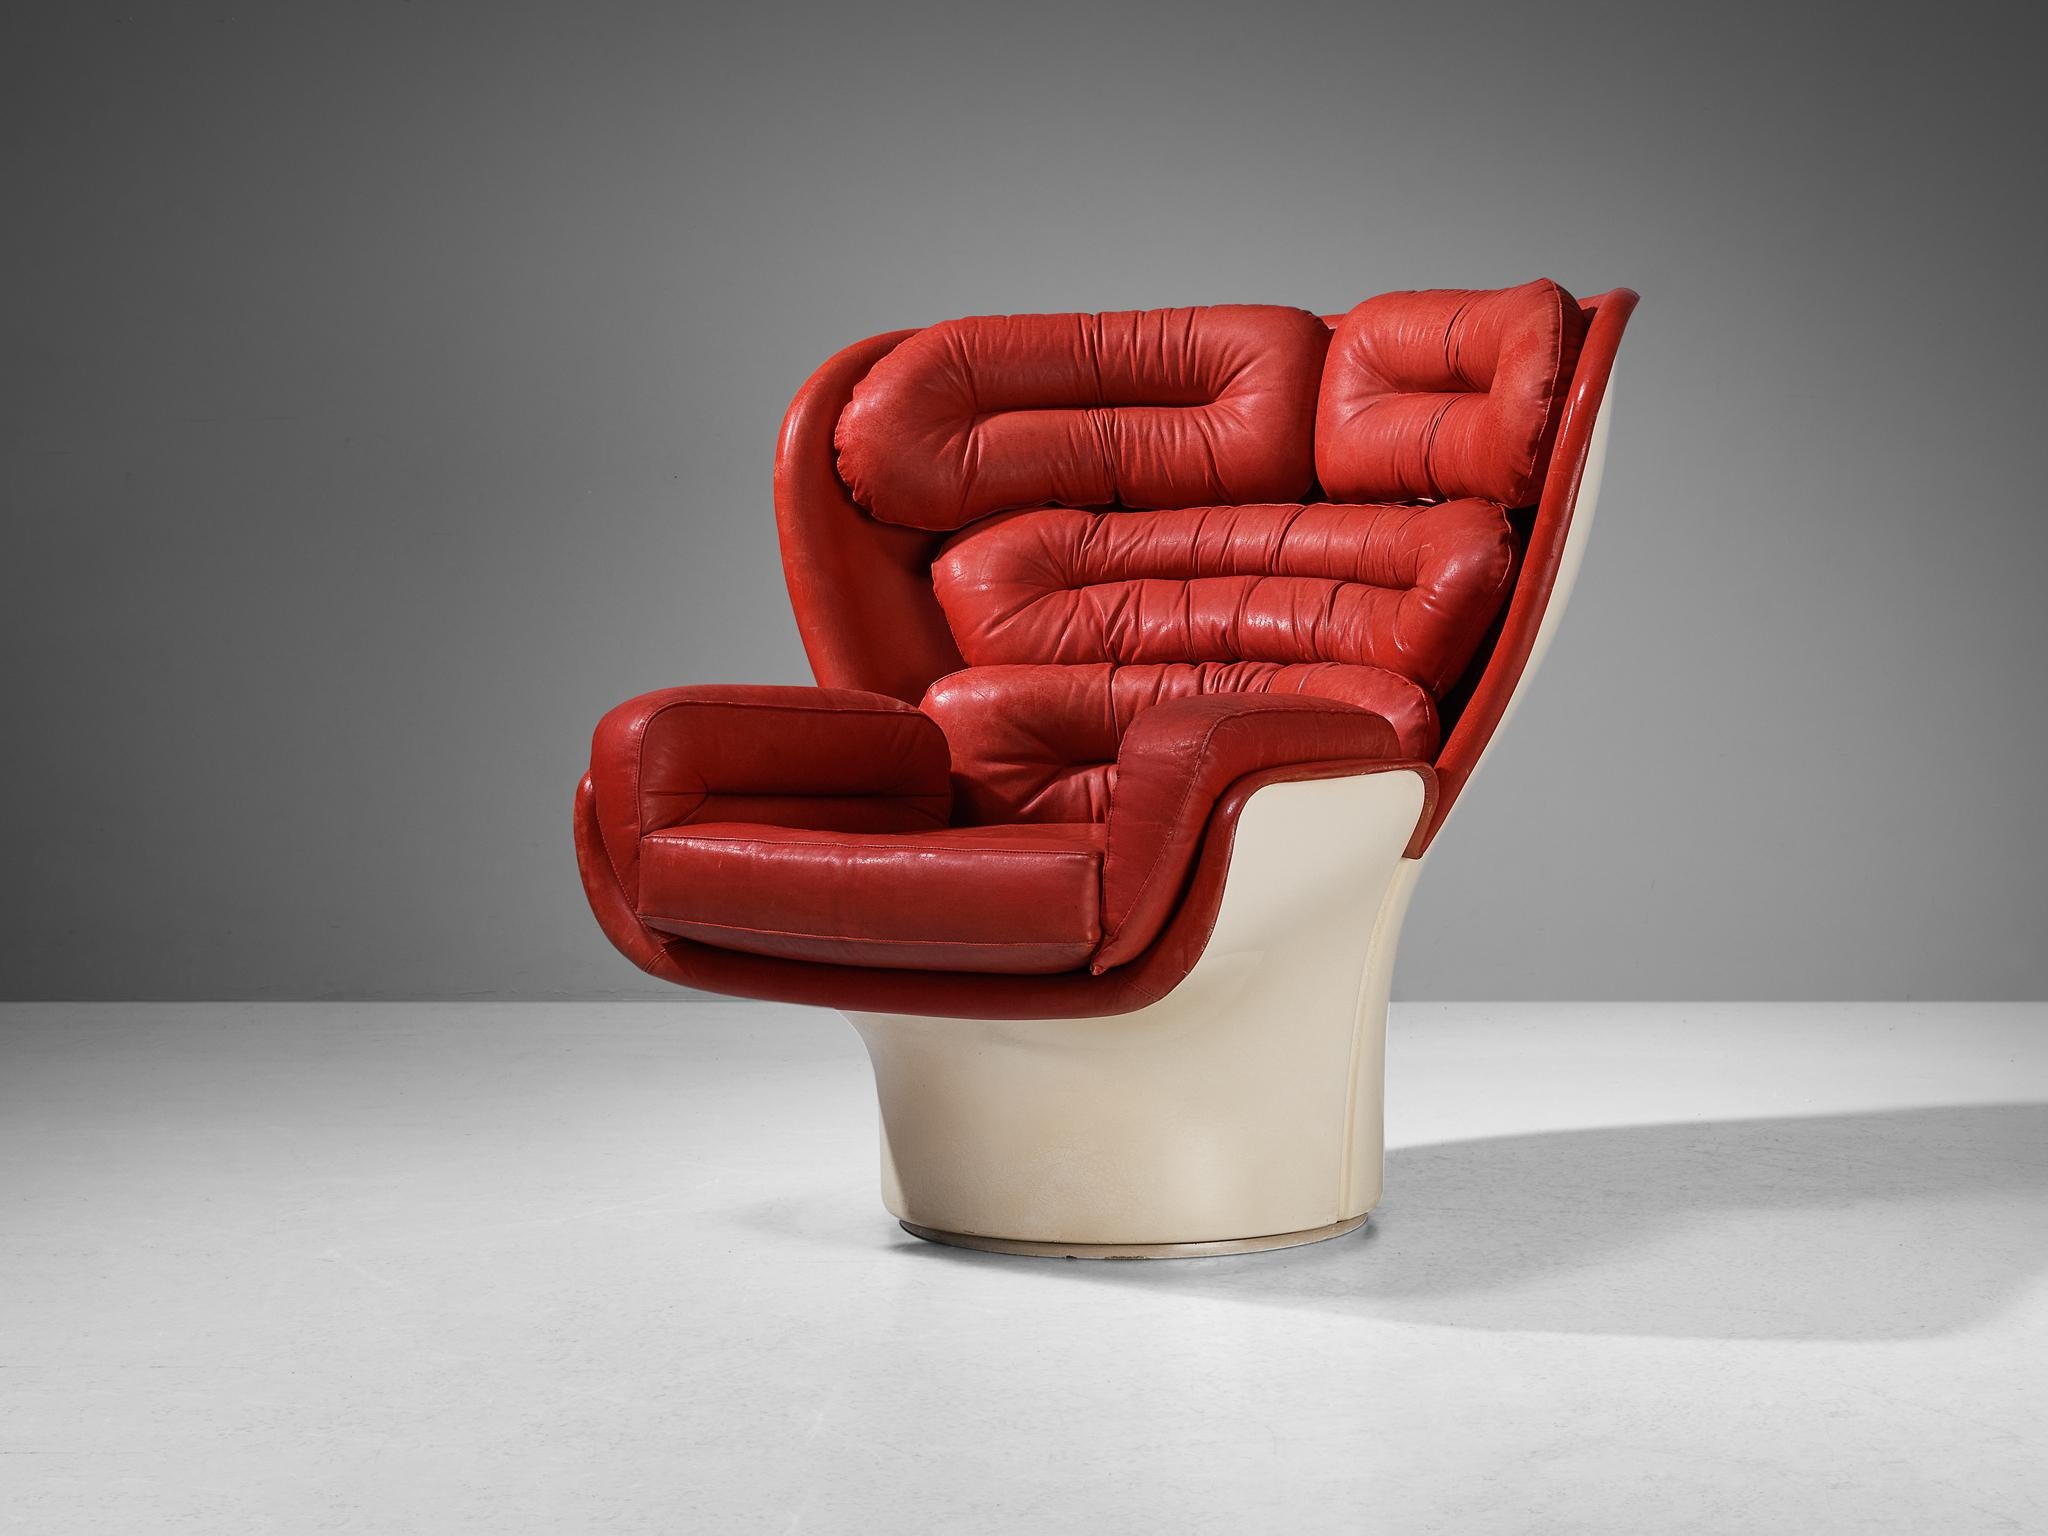 Joe Colombo for Comfort, lounge chair ‘Elda’, fiberglass, red leather, Italy, design 1963, later production 

The ‘Elda’ chair is one of the most well-known designs of Italian designer Joe Colombo. This lounge chair is one of the first designs using